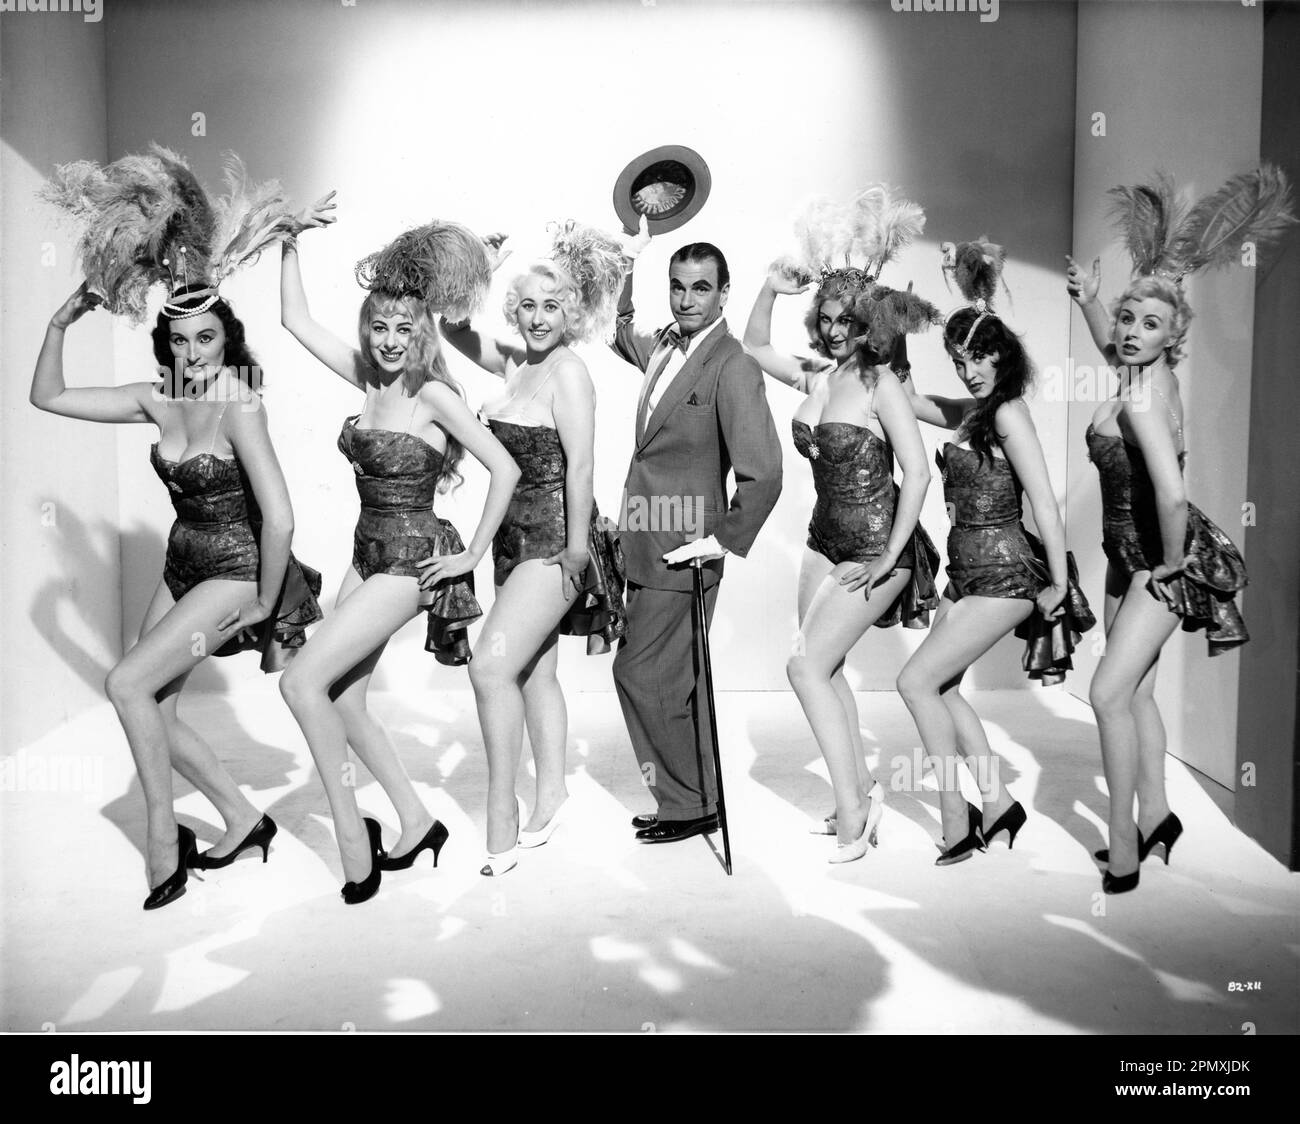 LAURENCE OLIVIER as Archie Rice with Showgirls / Chorus Girls on Stage in THE ENTERTAINER 1960 director TONY RICHARDSON screenplay John Osborne and Nigel Kneale adapted from the play by John Osborne music John Addison producer Harry Saltzman Woodfall Film Productions / British Lion Films (UK) - Continental Distributing (US) Stock Photo